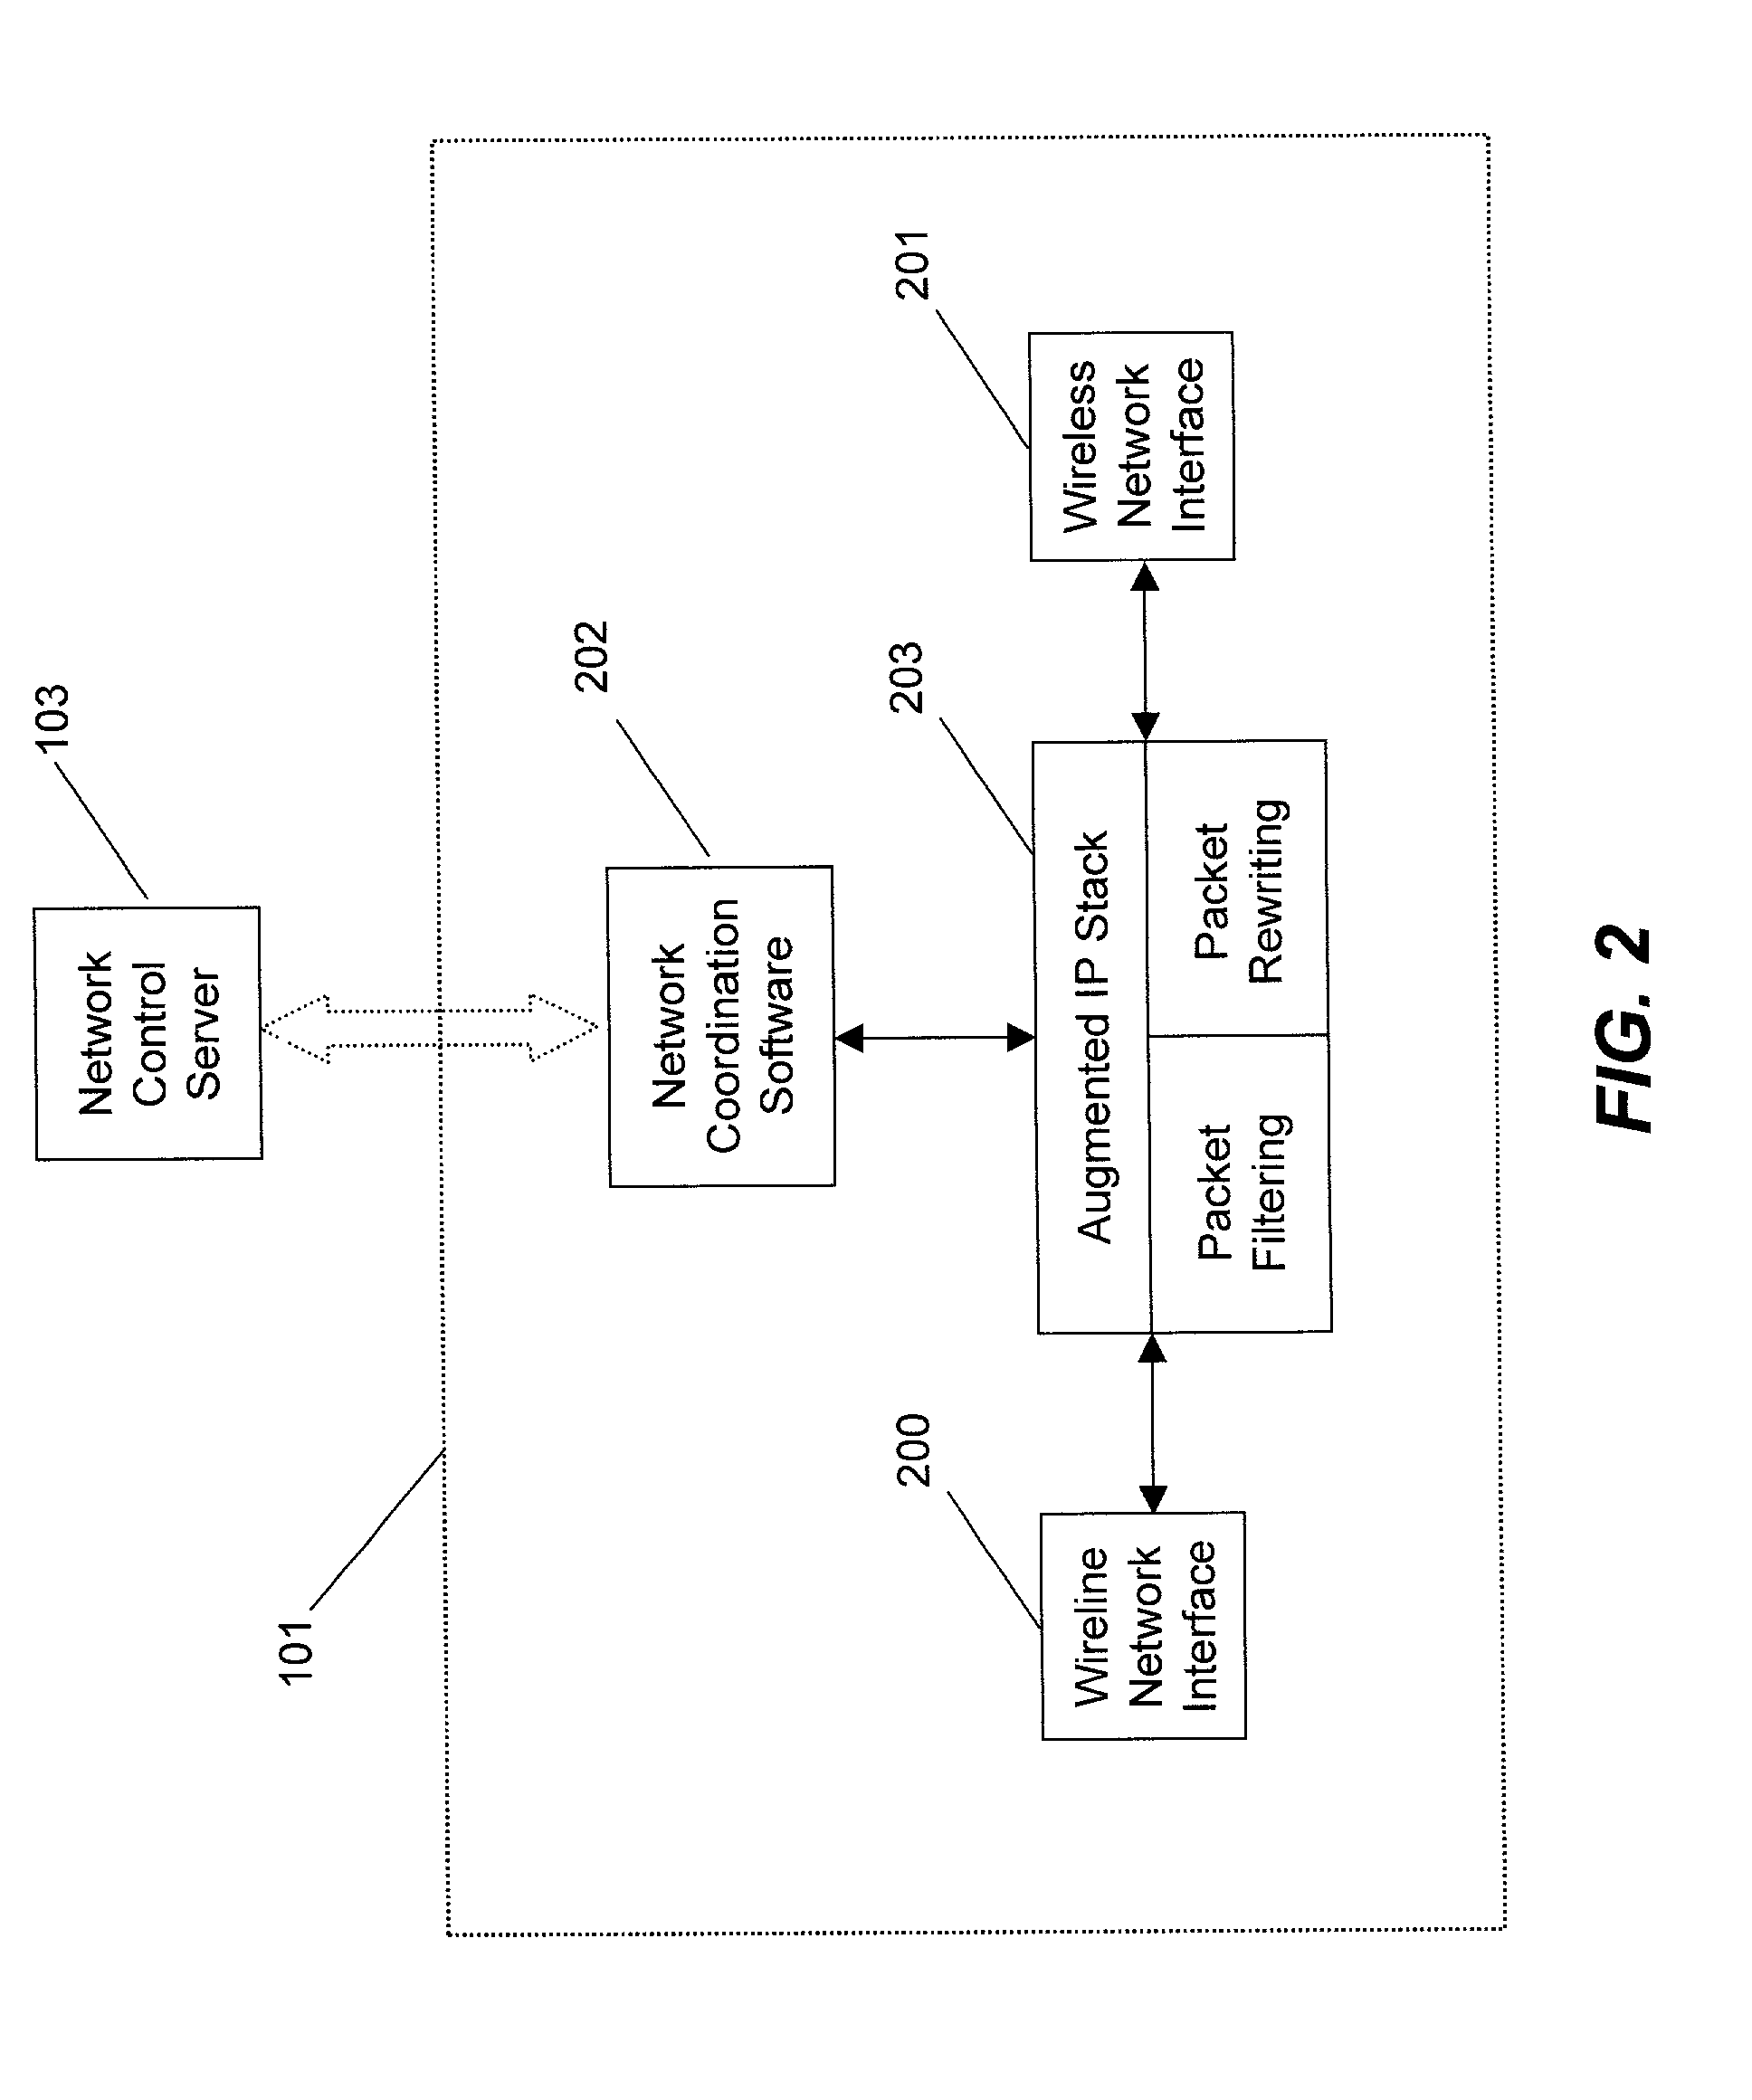 Location-aware service proxies in a short-range wireless environment